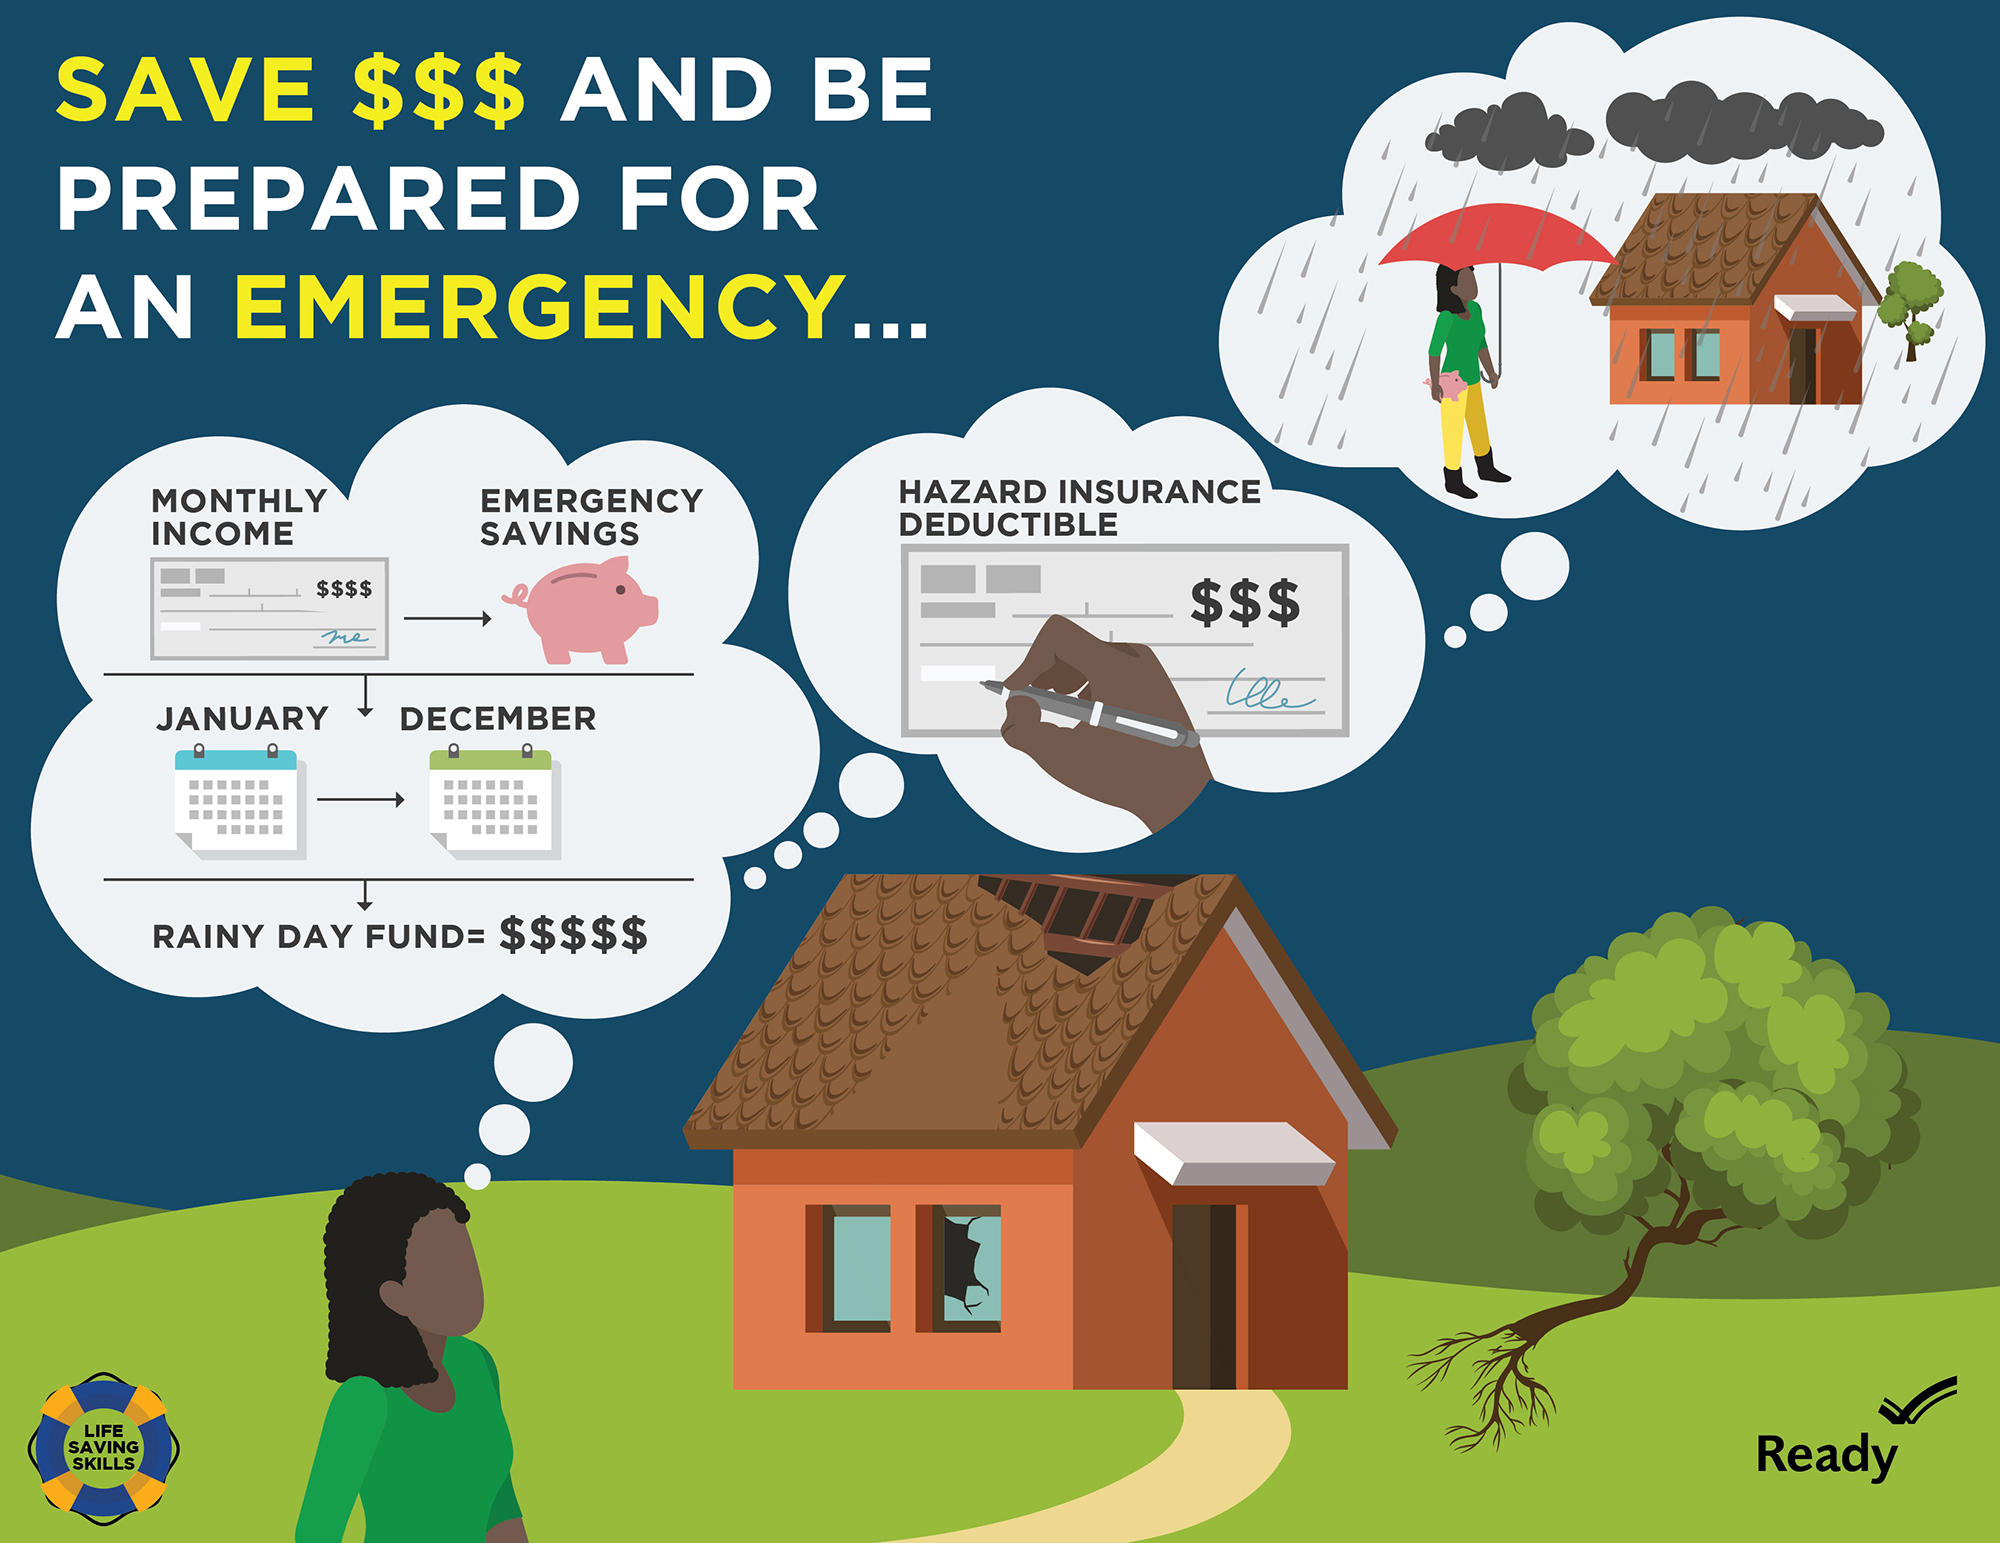 Graphic of woman standing in front of damaged home. Thought bubbles show her thinking about saving money for an emergency.